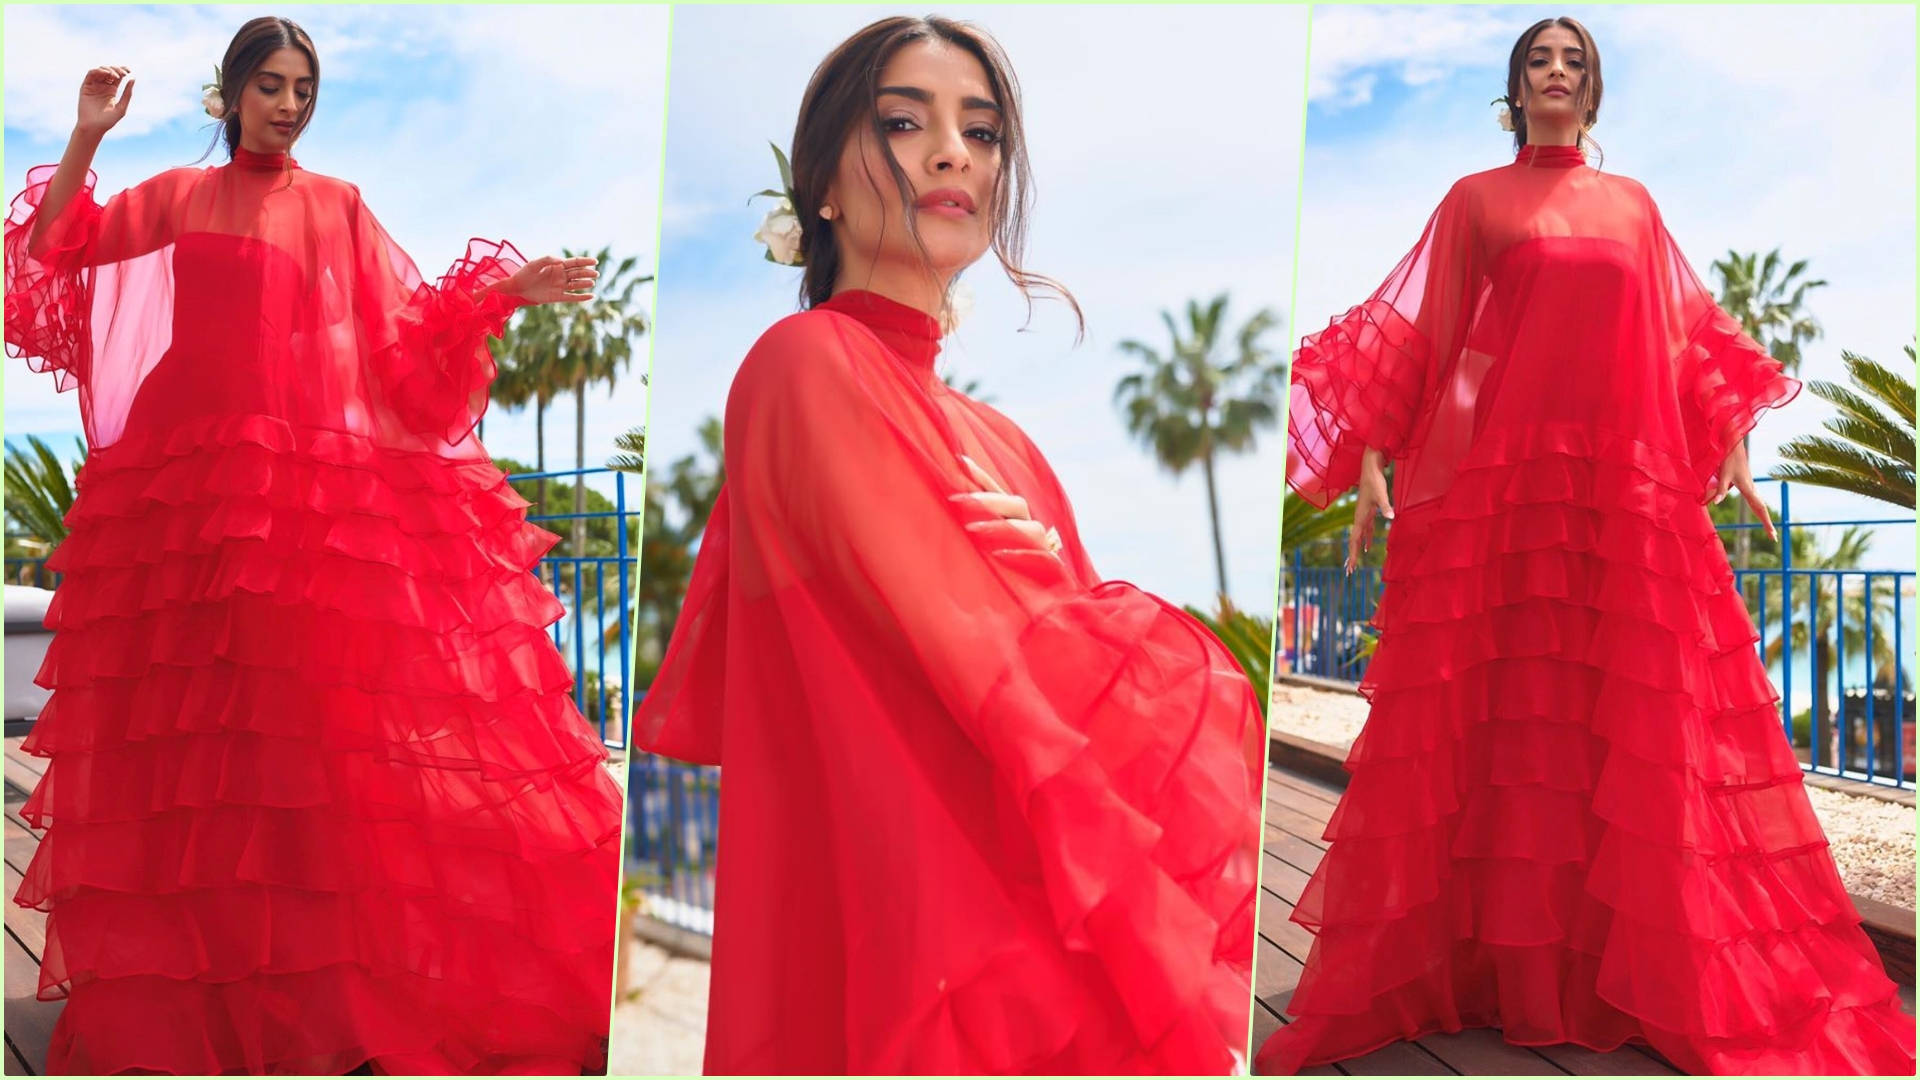 Sonam Kapoor Ahuja In Cannes 2019 Background